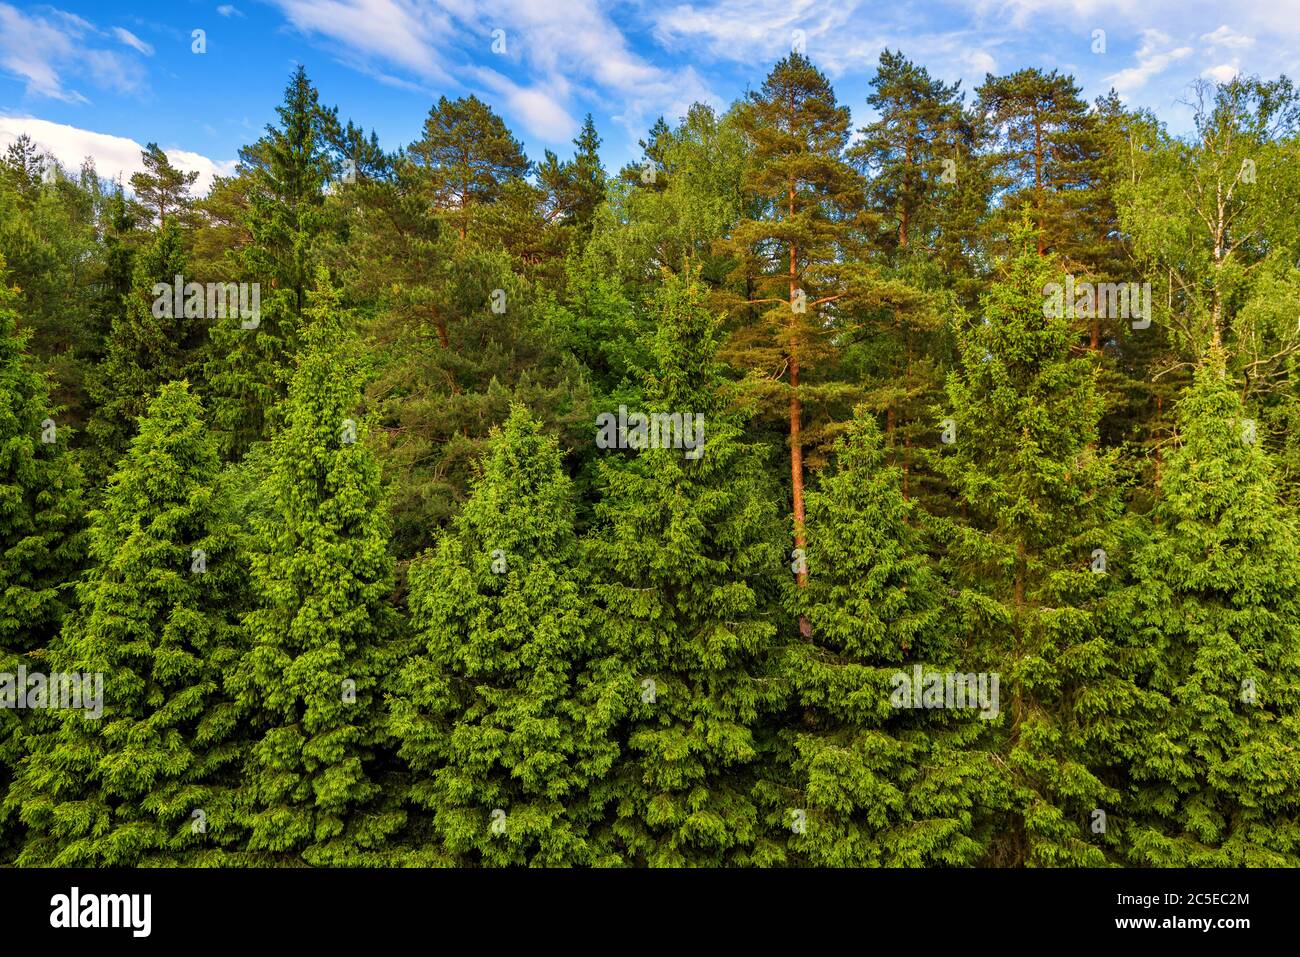 Green spruce or coniferous forest for background Stock Photo